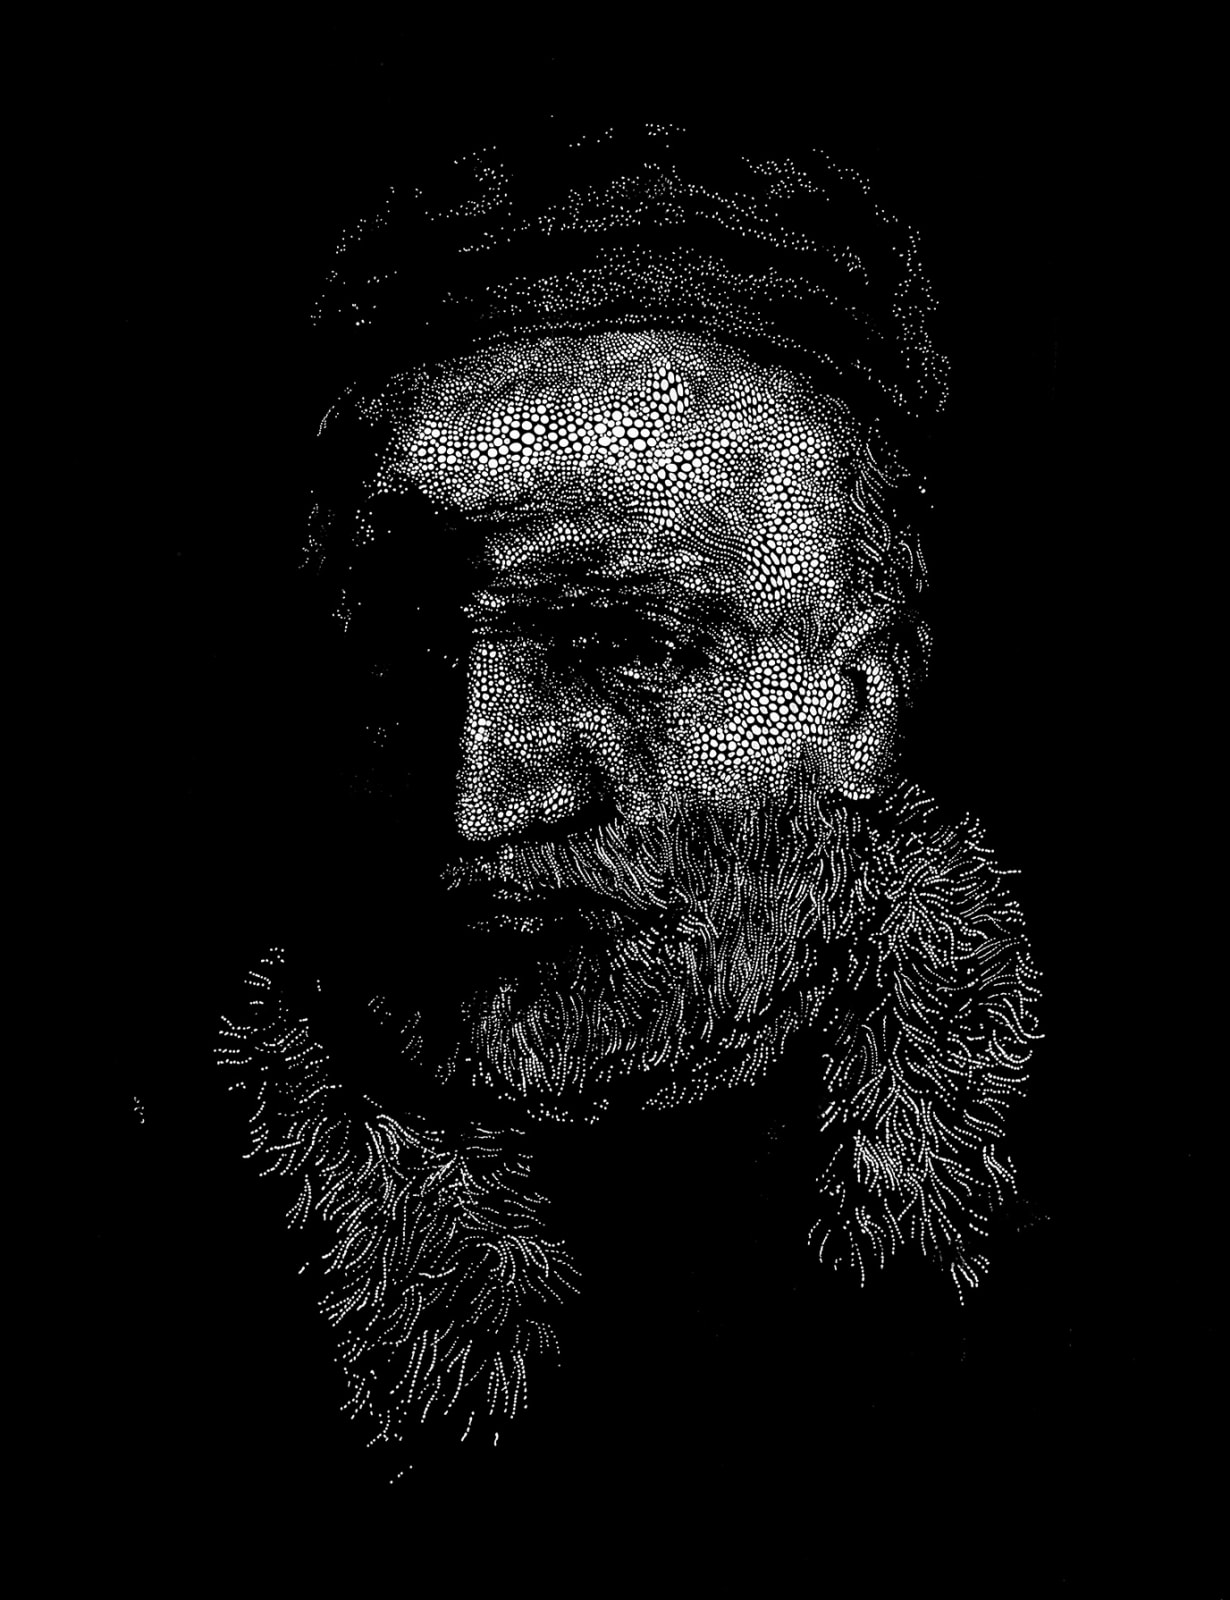 Sebastiaan Bremer Jan black and white image of Old Masters style man's head painted with dots emerging from black background